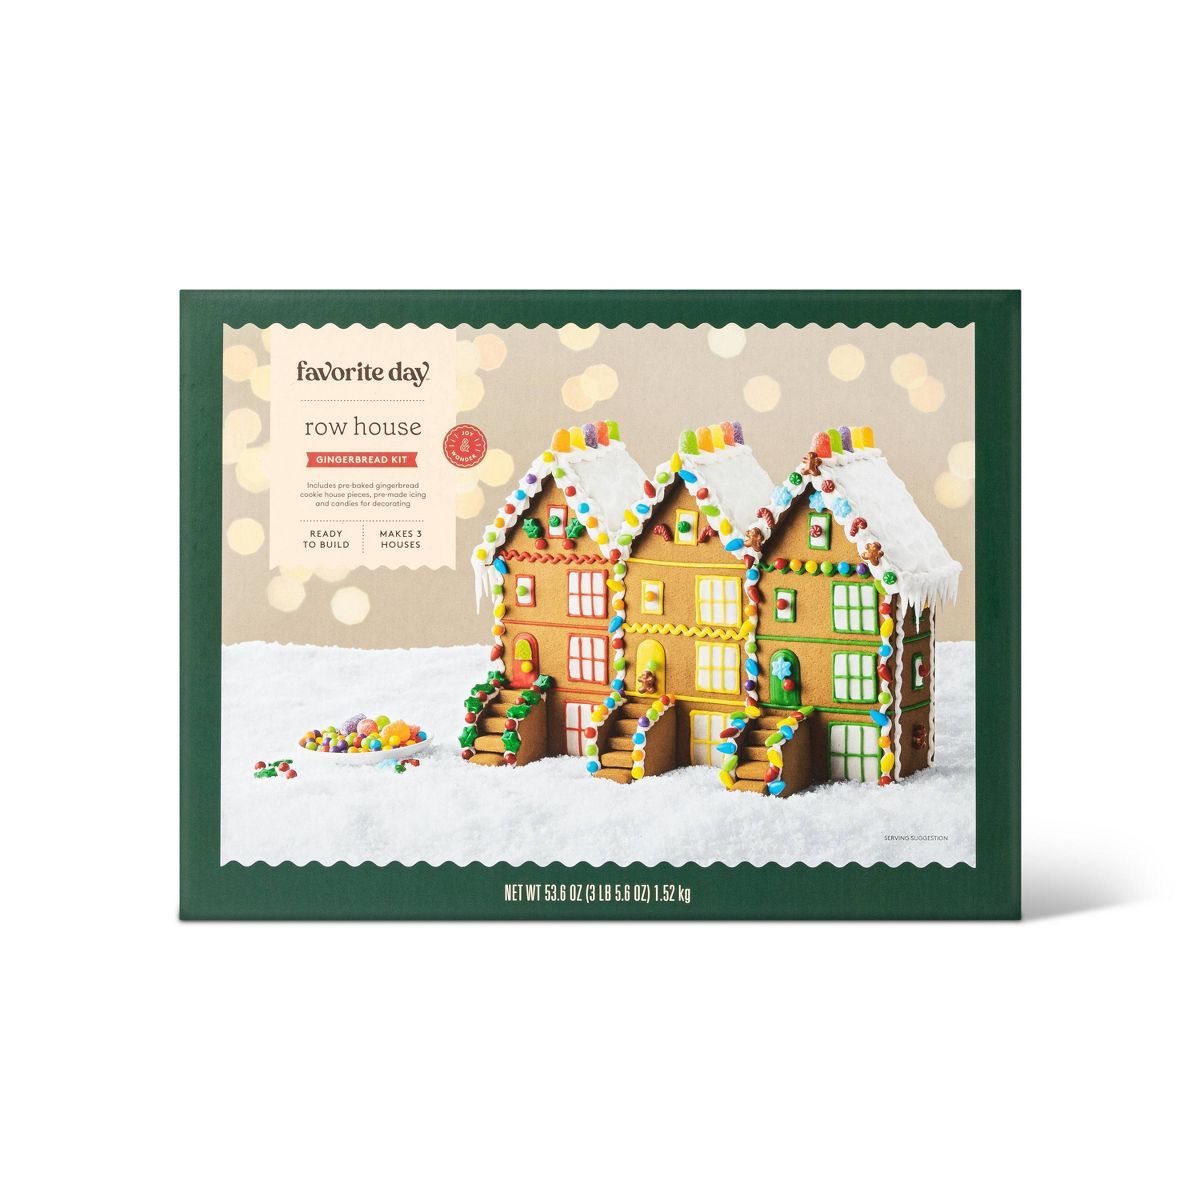 Holiday Row House Gingerbread House Kit - 51.54oz - Favorite Day™ | Target